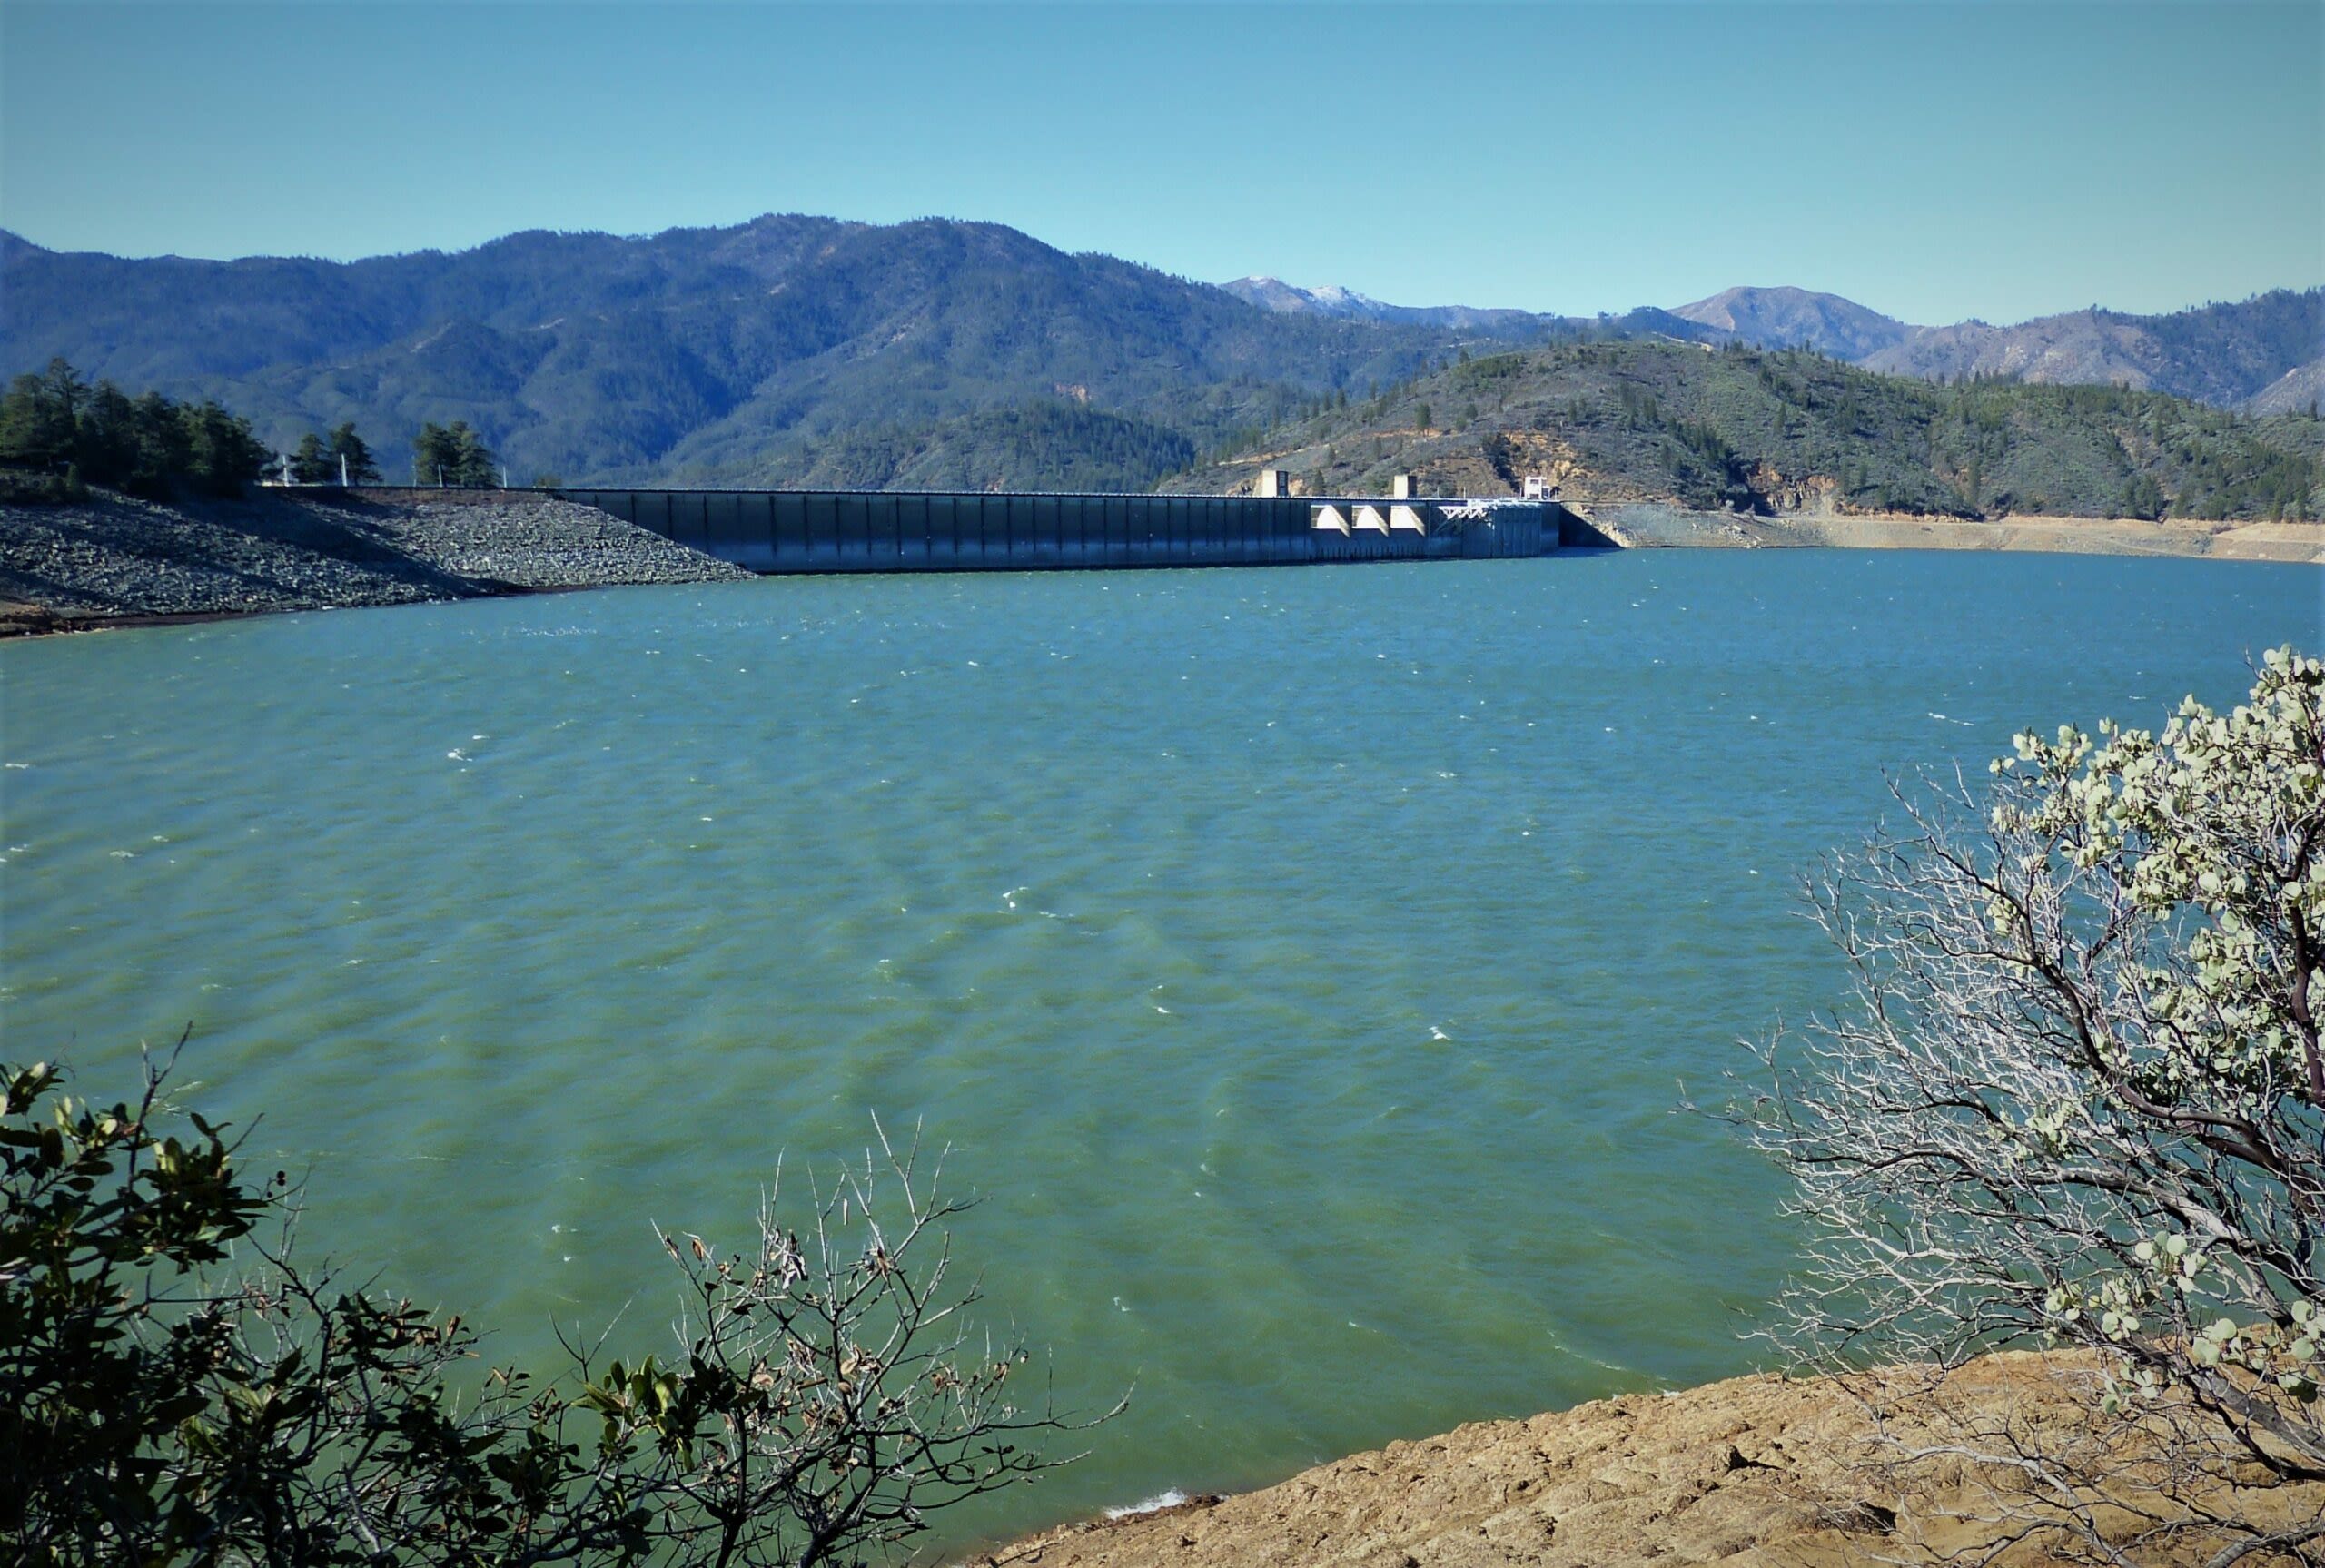 California’s Lake Shasta rises from severe-drought levels in stunning before and after images